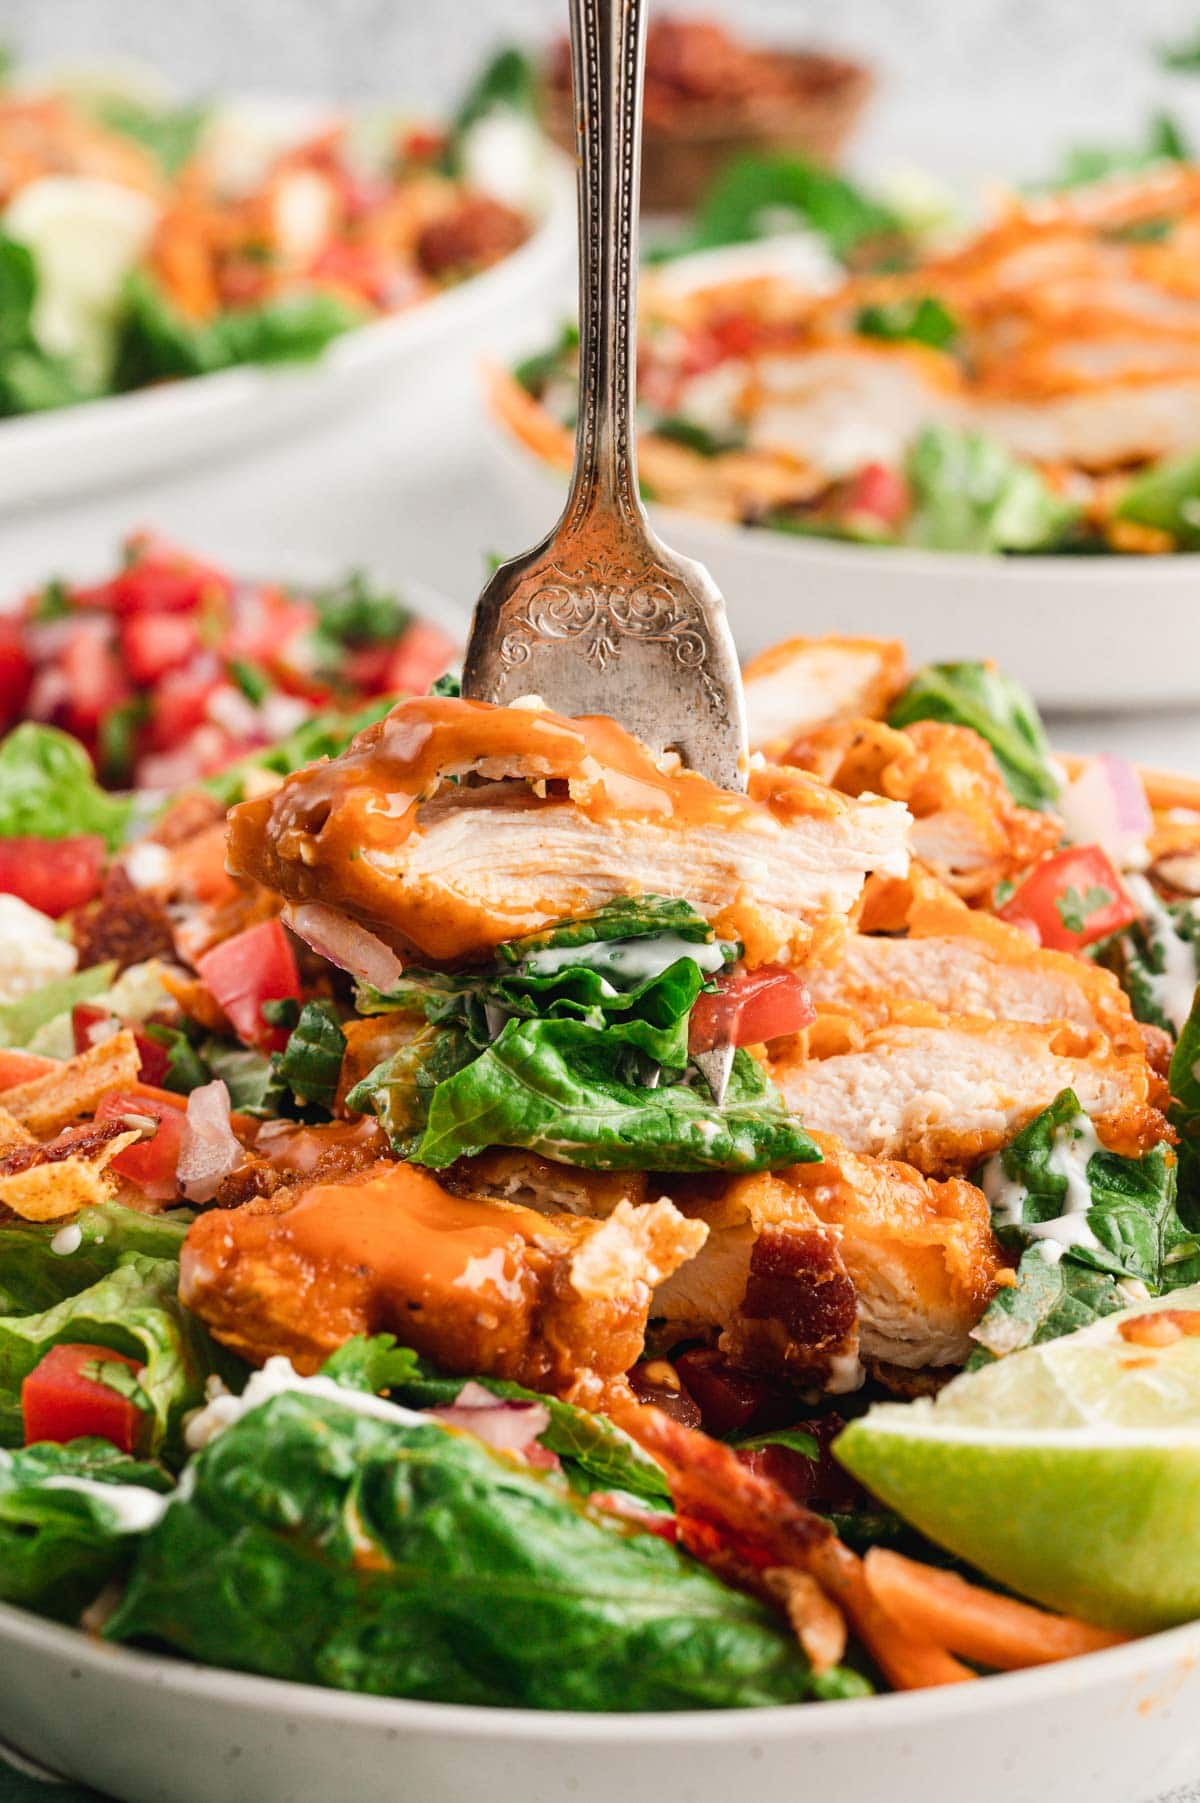 Buffalo chicken and salad on a fork.